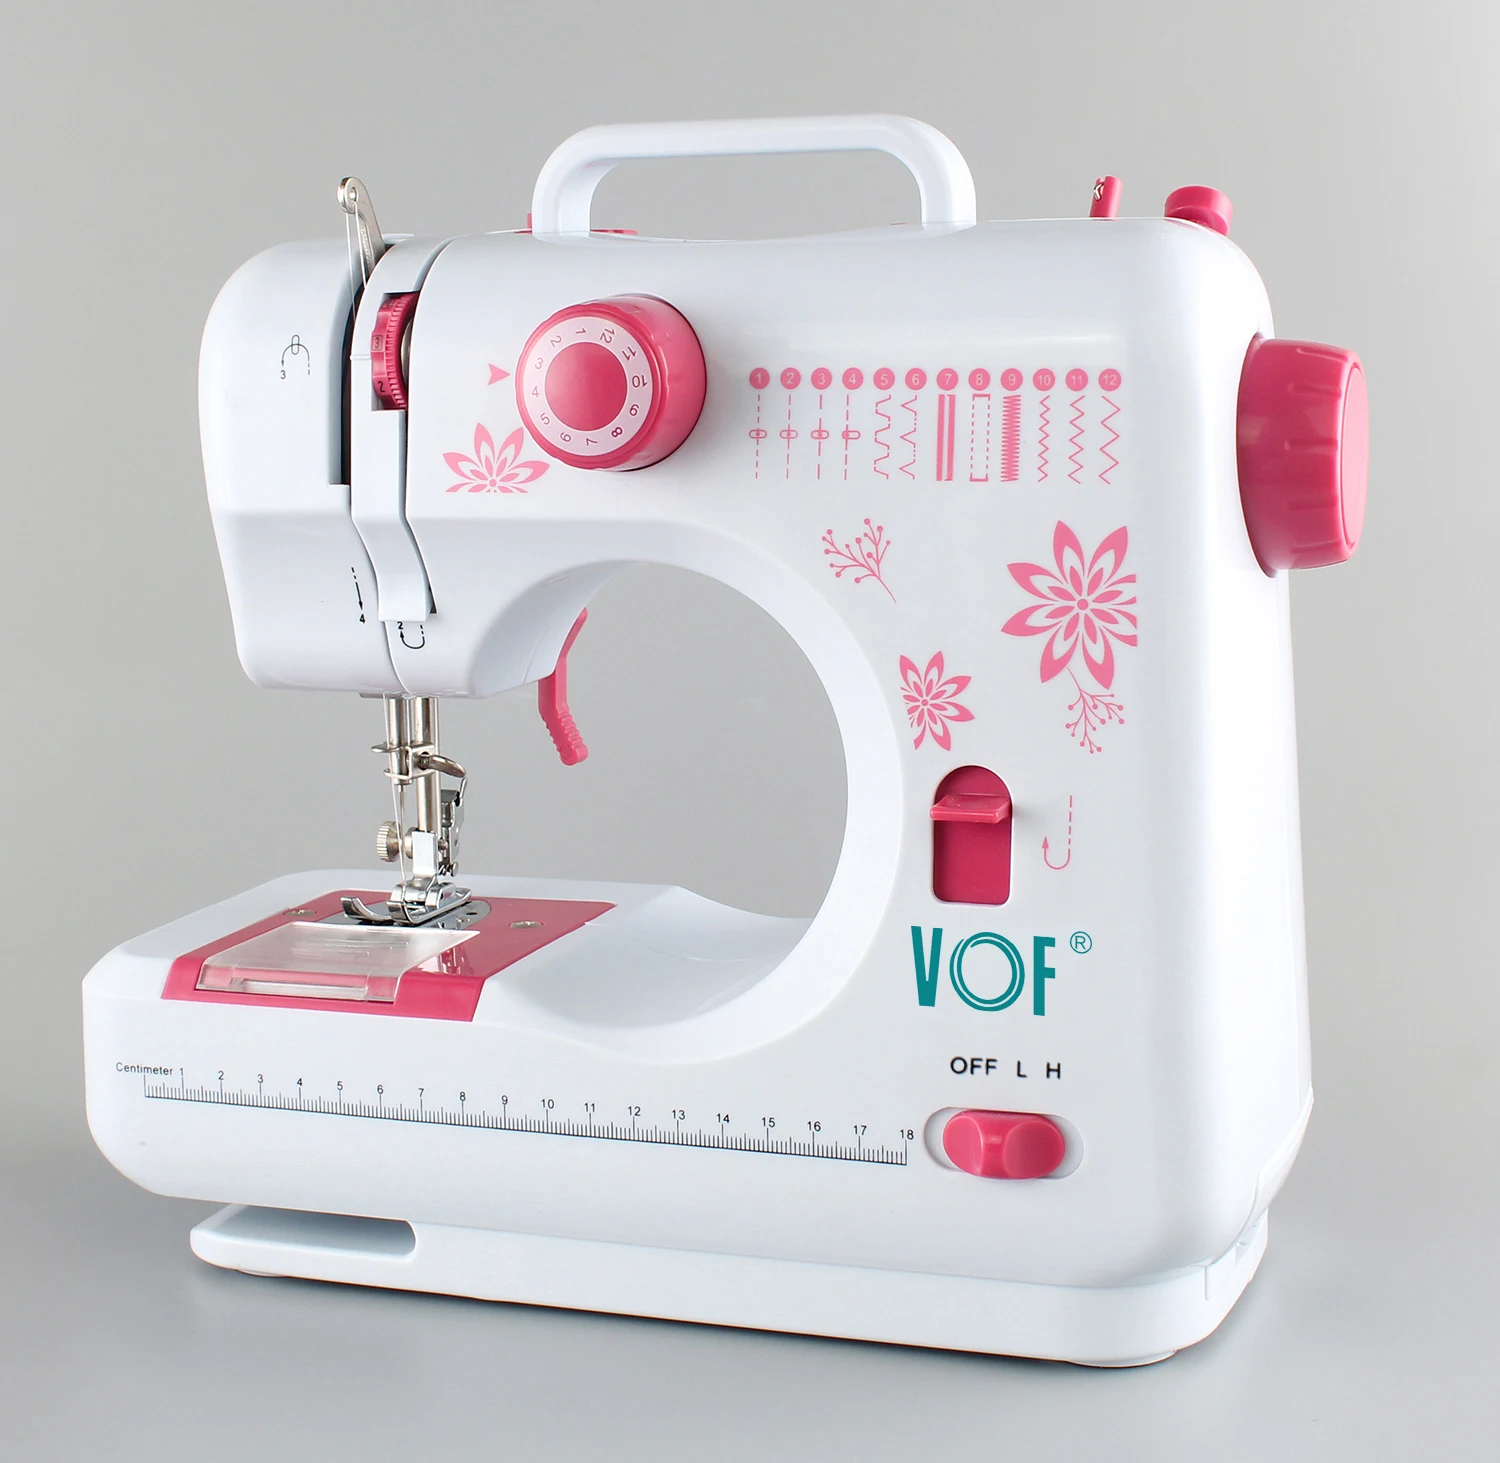 
VOF 2021Hot Sell FHSM 505G electric handheld overlock sewing machine with foot pedal 